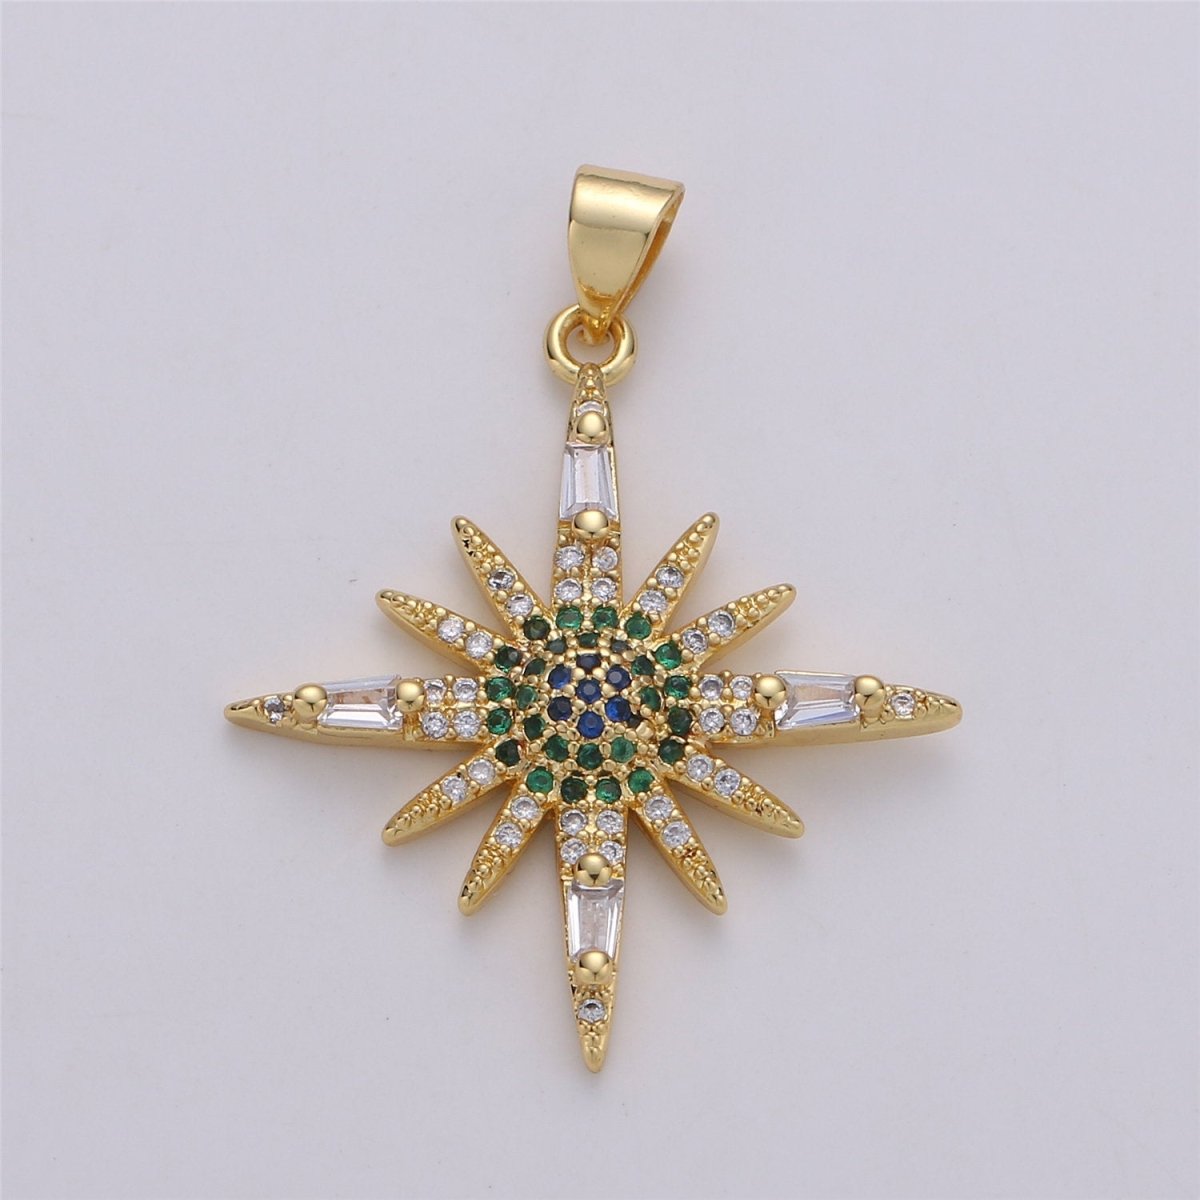 24K Gold Filled Dainty Sunburst Shining Star with Micro Pave Multi Color Cubic Zirconia CZ Stone for Necklace or Earrings I-572 - DLUXCA